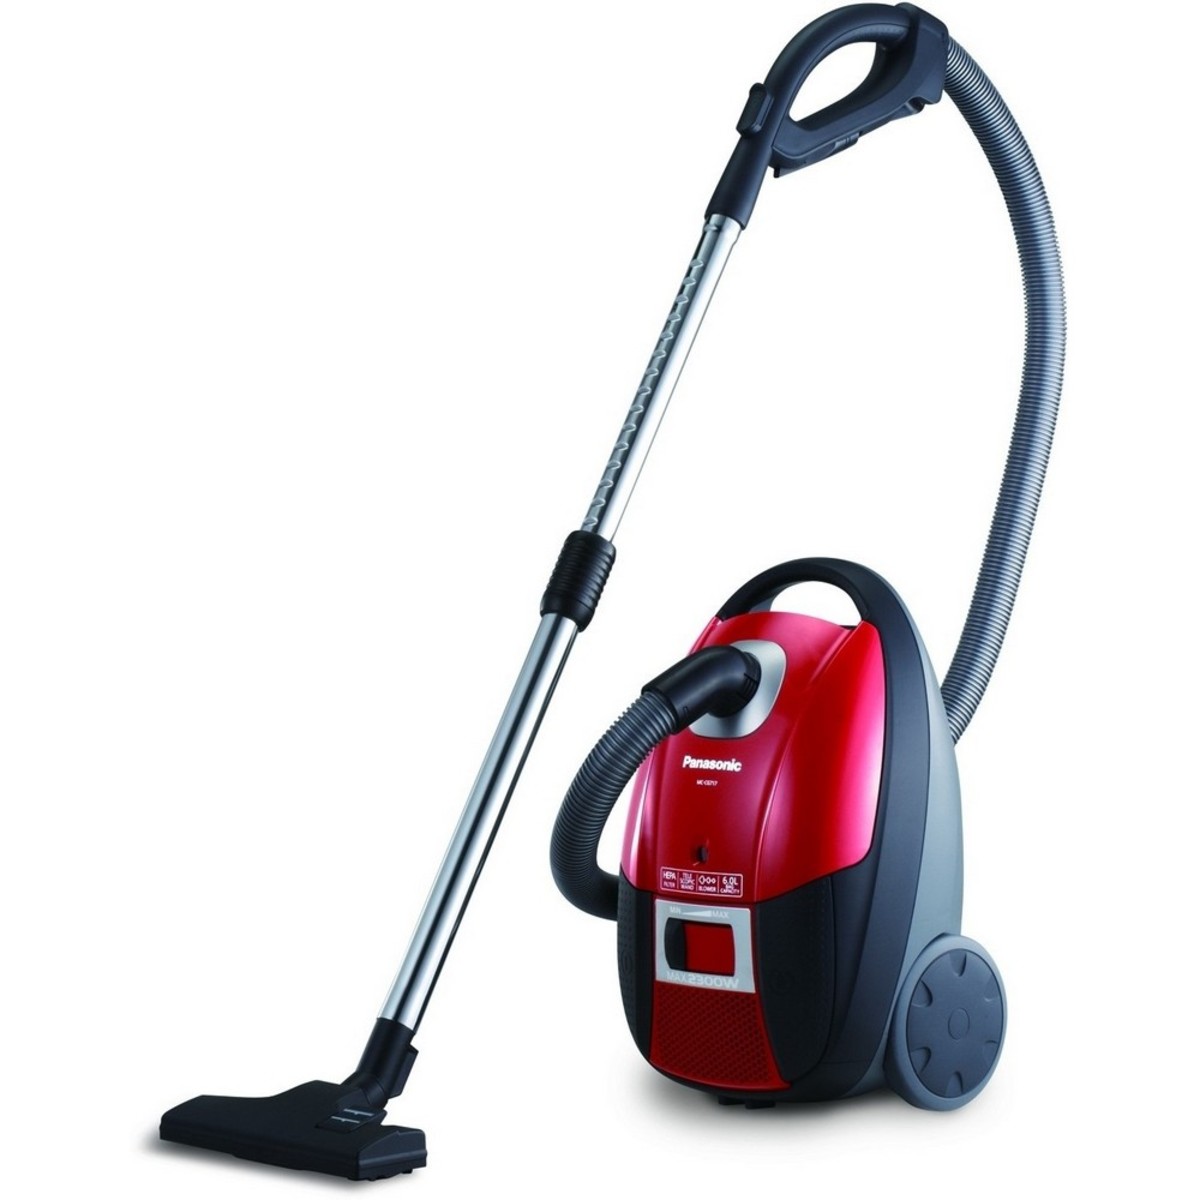 Buy Panasonic Vacuum Cleaner MCCG717R Online at Best Price | Canister Vac.Cleaner | Lulu Kuwait in Kuwait